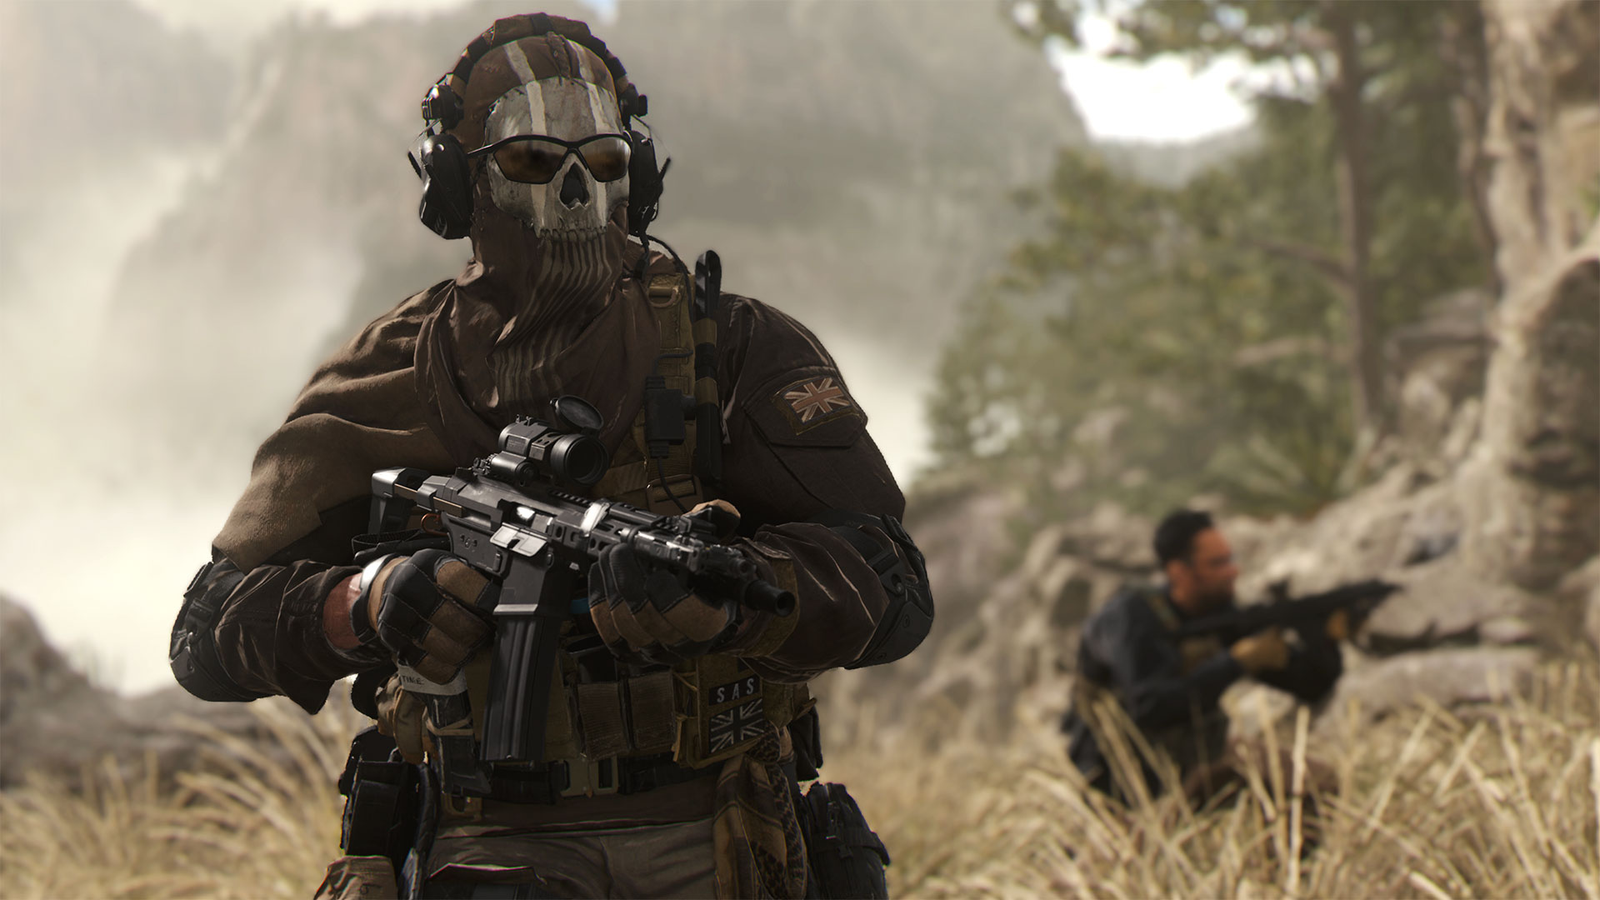 PlayStation: Xbox's Call of Duty offer was "inadequate on many levels" | GamesIndustry.biz